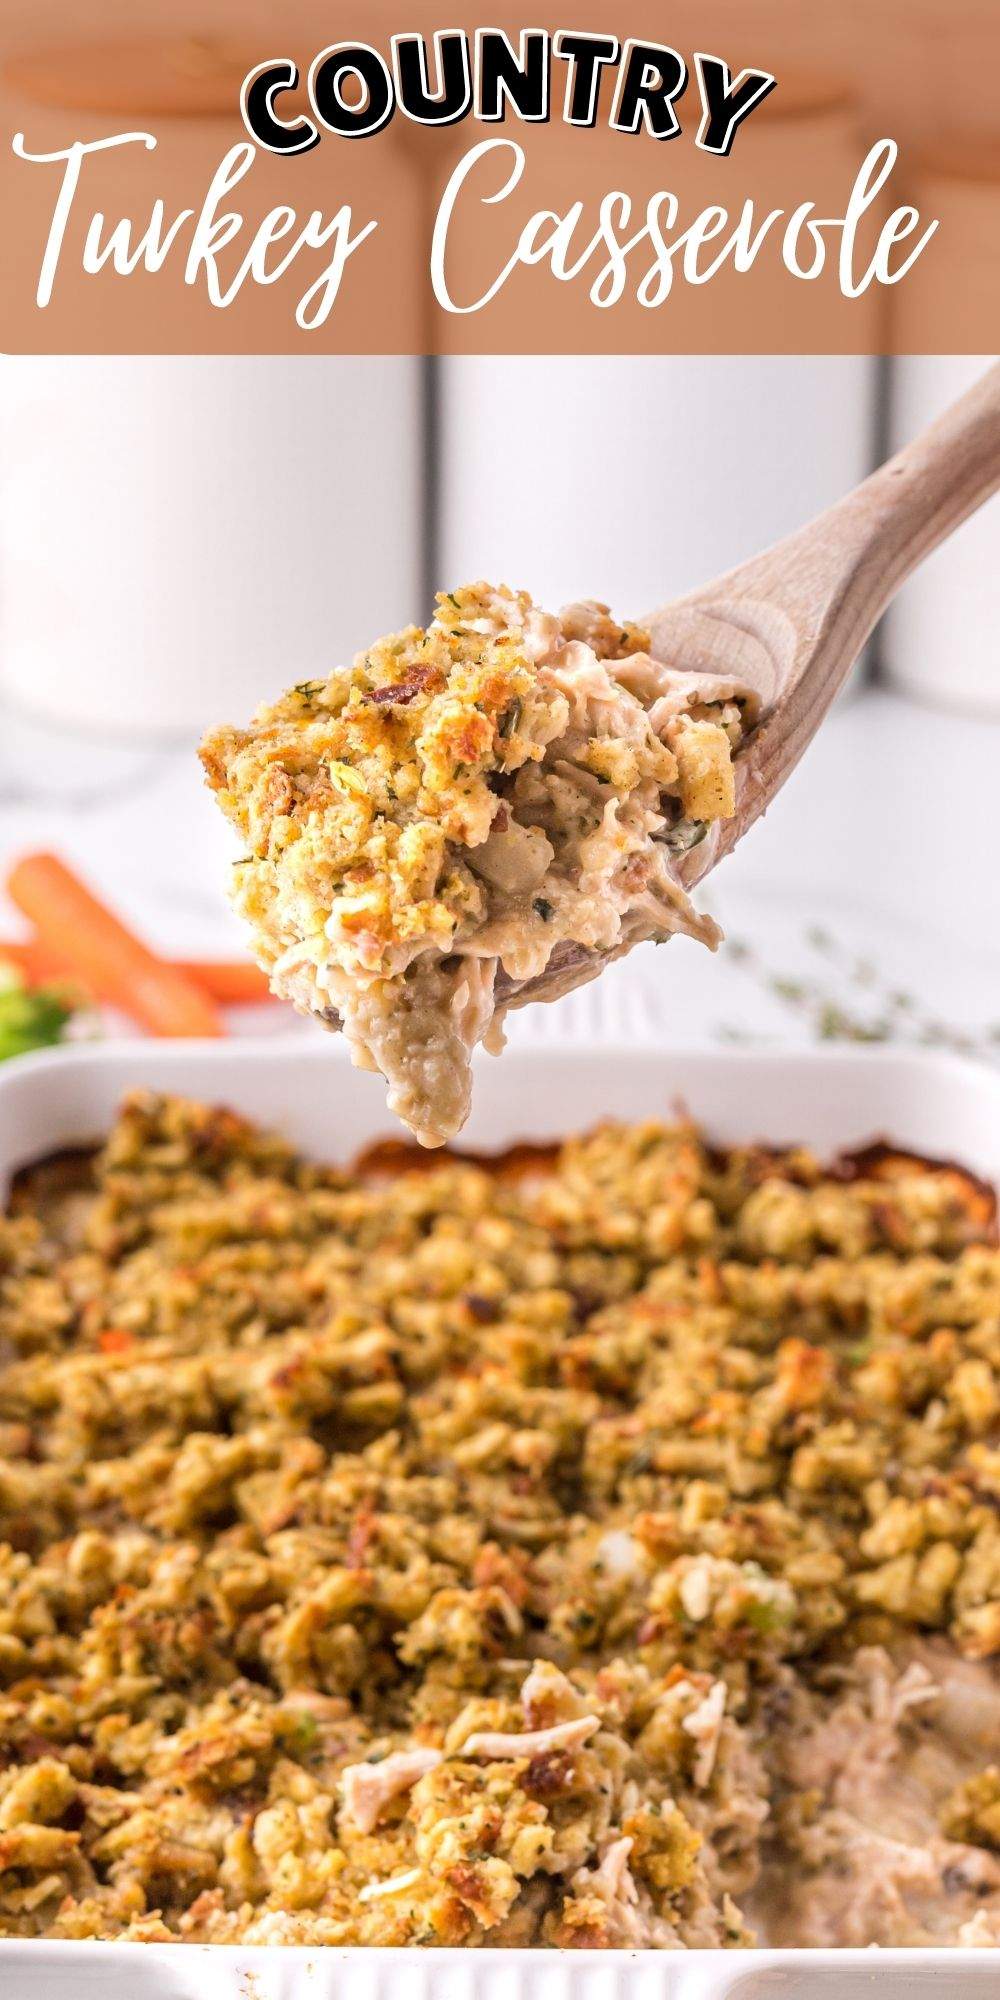 This Country Turkey Casserole is the perfect casserole you can make with all the leftovers in your fridge. via @familyfresh